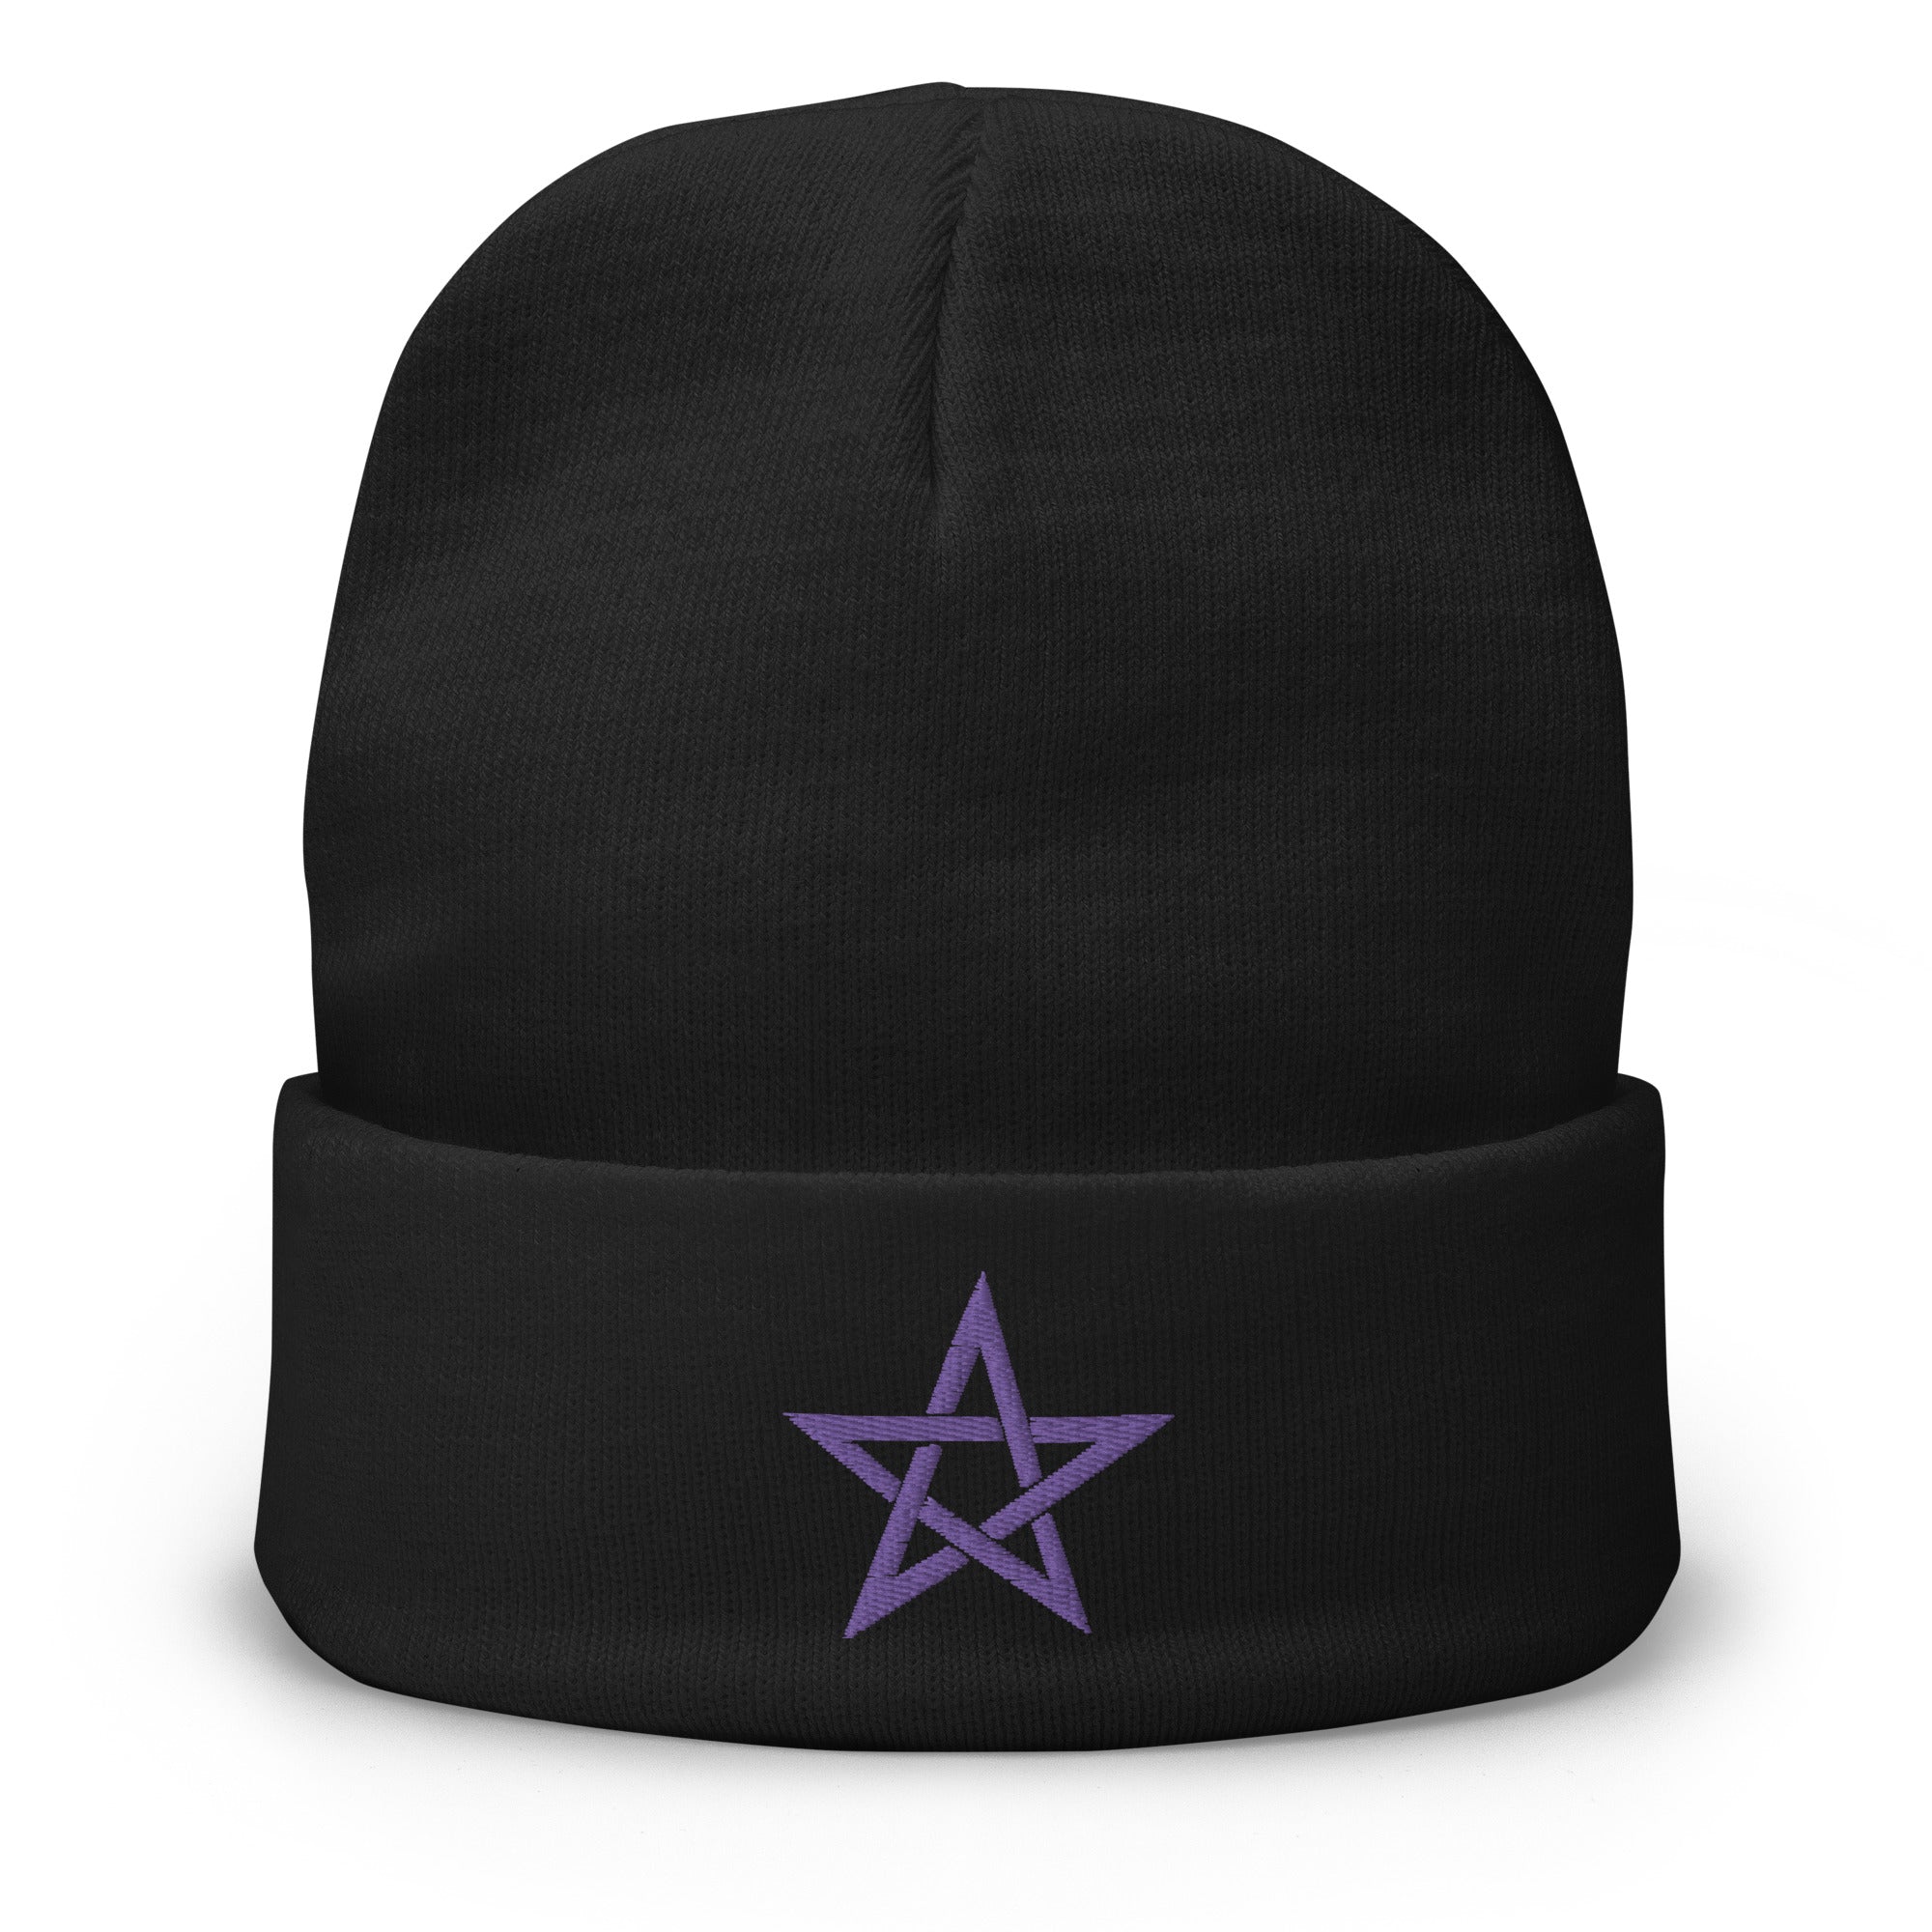 Wiccan Woven Pentagram Symbol Embroidered Cuff Beanie 5 Point Star - Edge of Life Designs